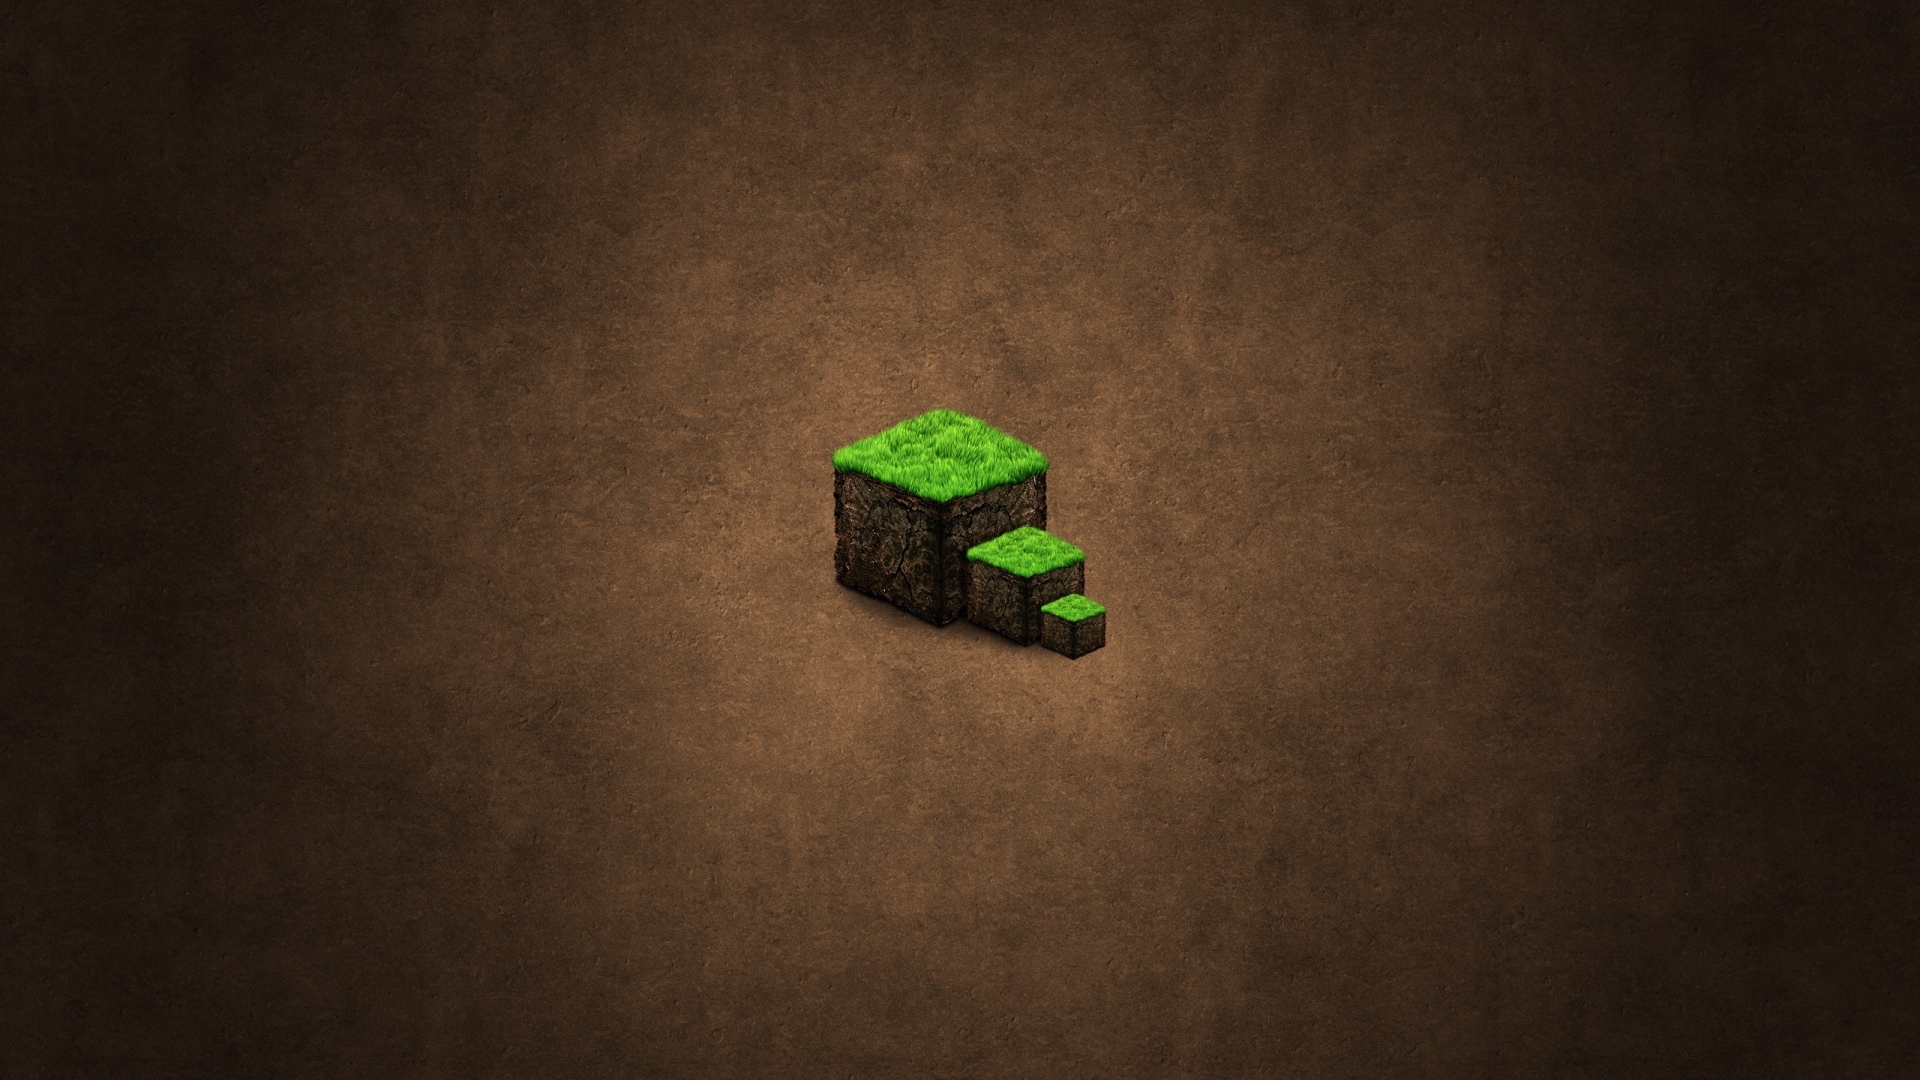 Minecraft Green Cubes for 1920 x 1080 HDTV 1080p resolution